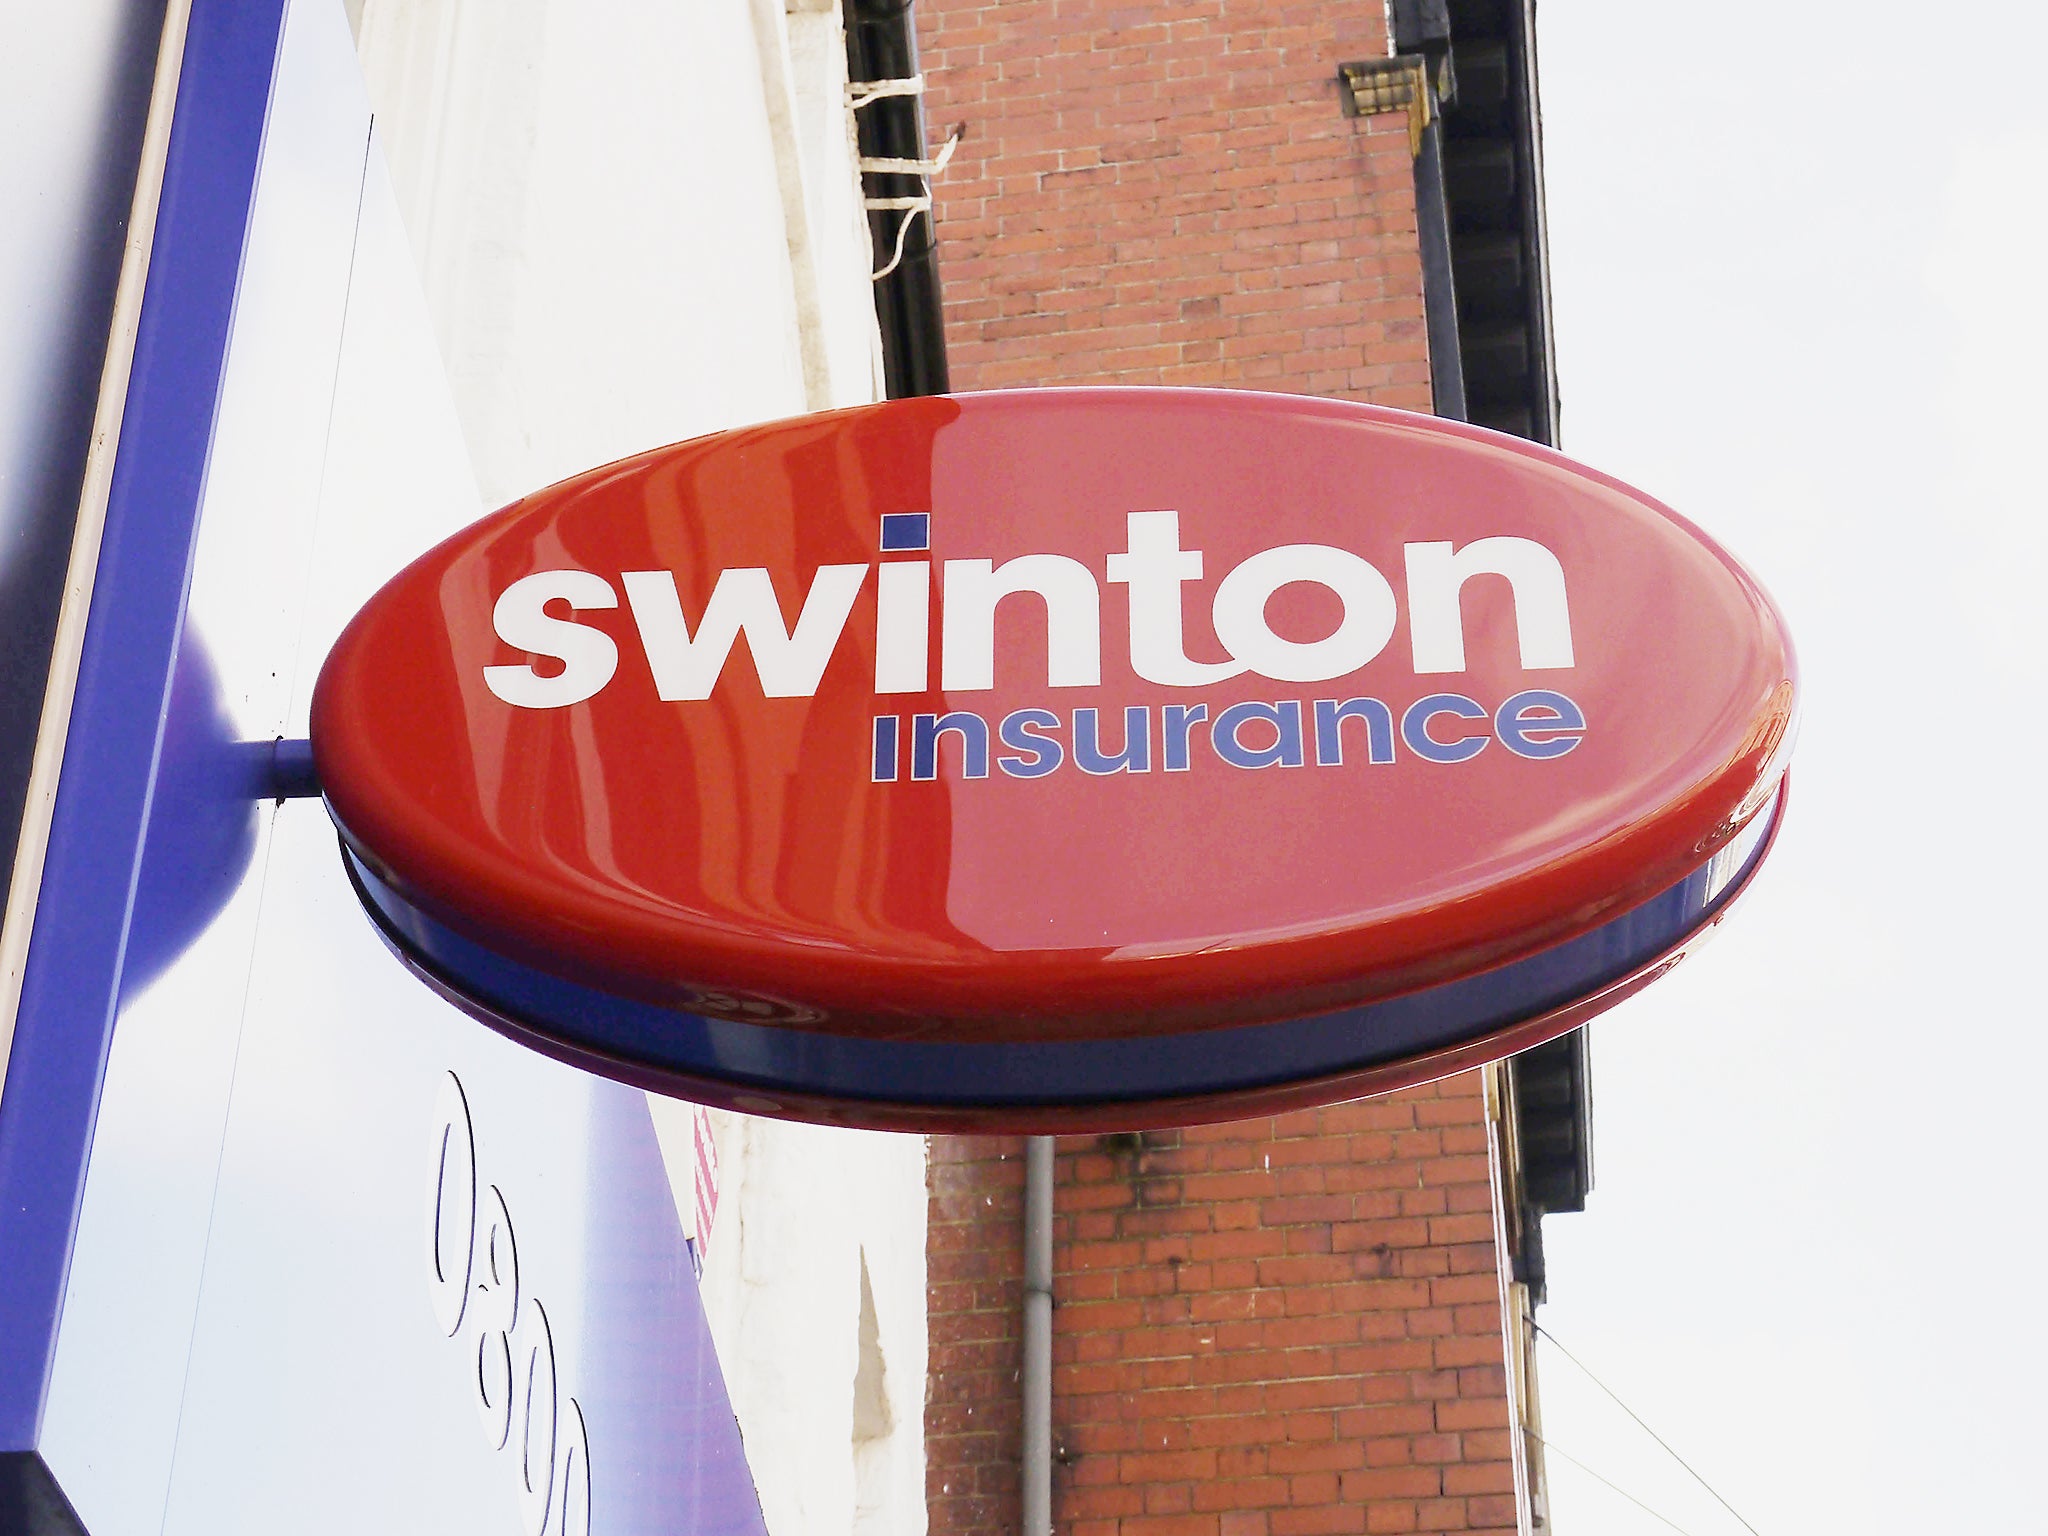 The company in a statement said that 90 per cent of its customers now buy insurance over the phone or online